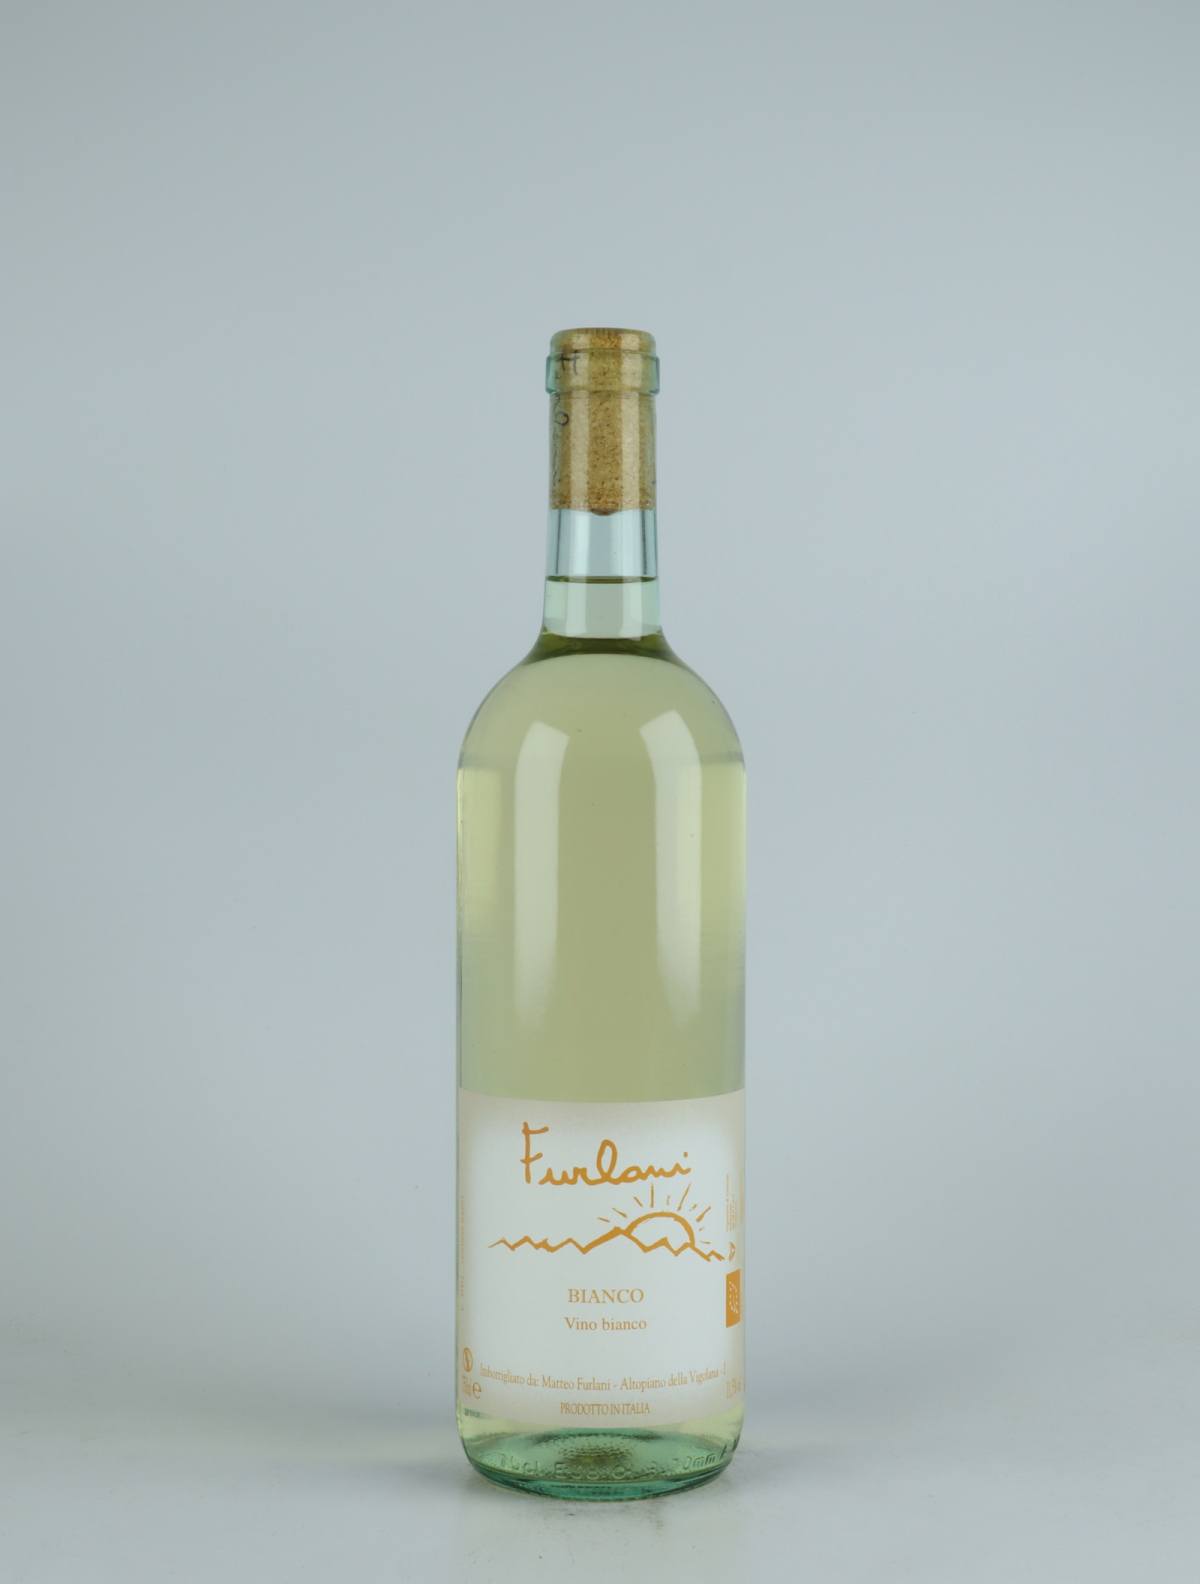 A bottle 2020 Bianco White wine from Cantina Furlani, Alto Adige in Italy